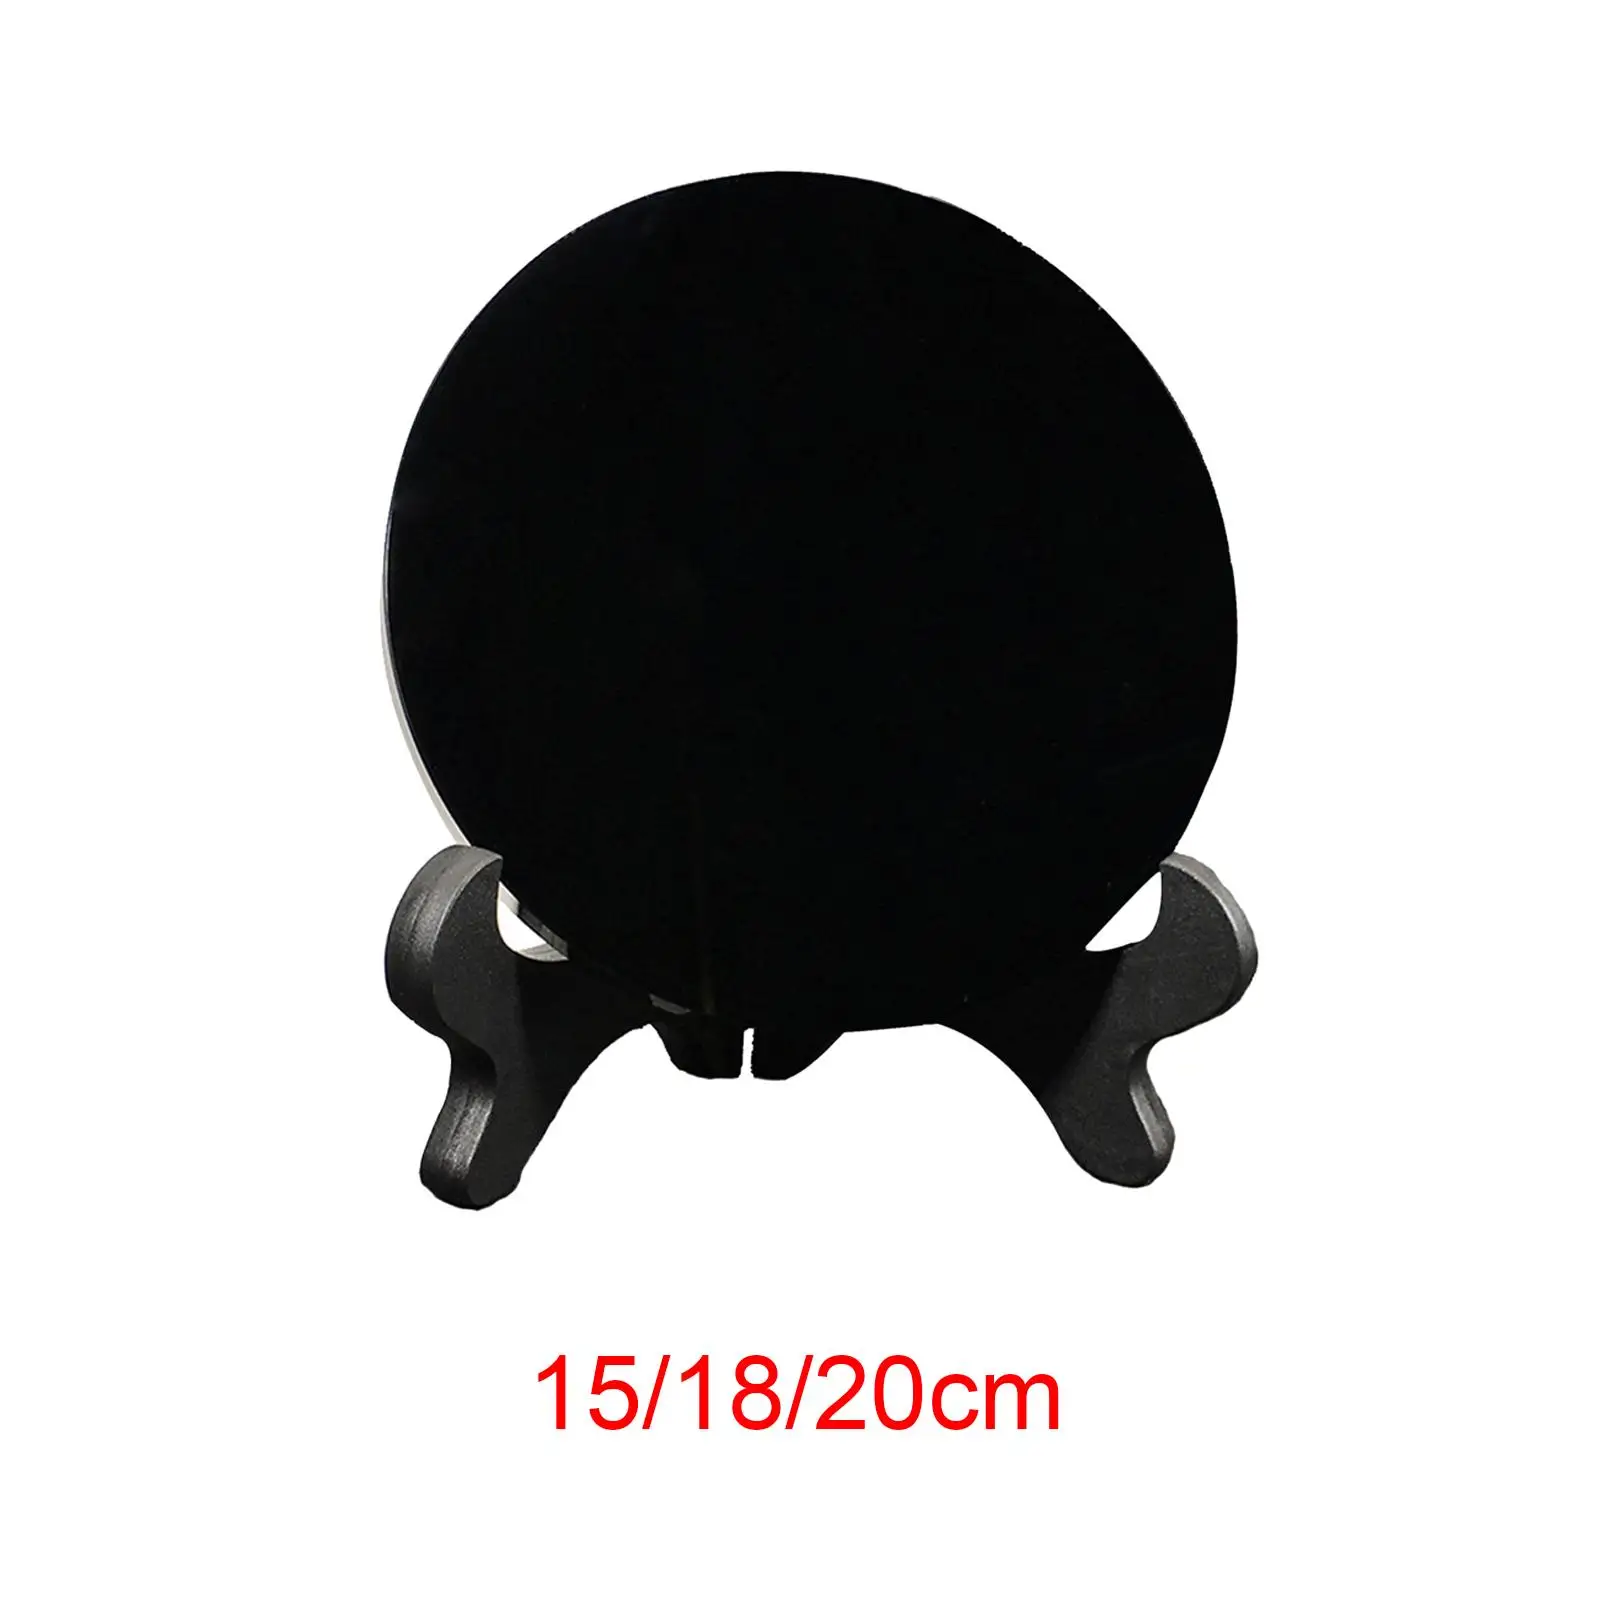 Obsidian Stone Disc with Stand Home Office Decor Meditation Flat Disk Yoga Round